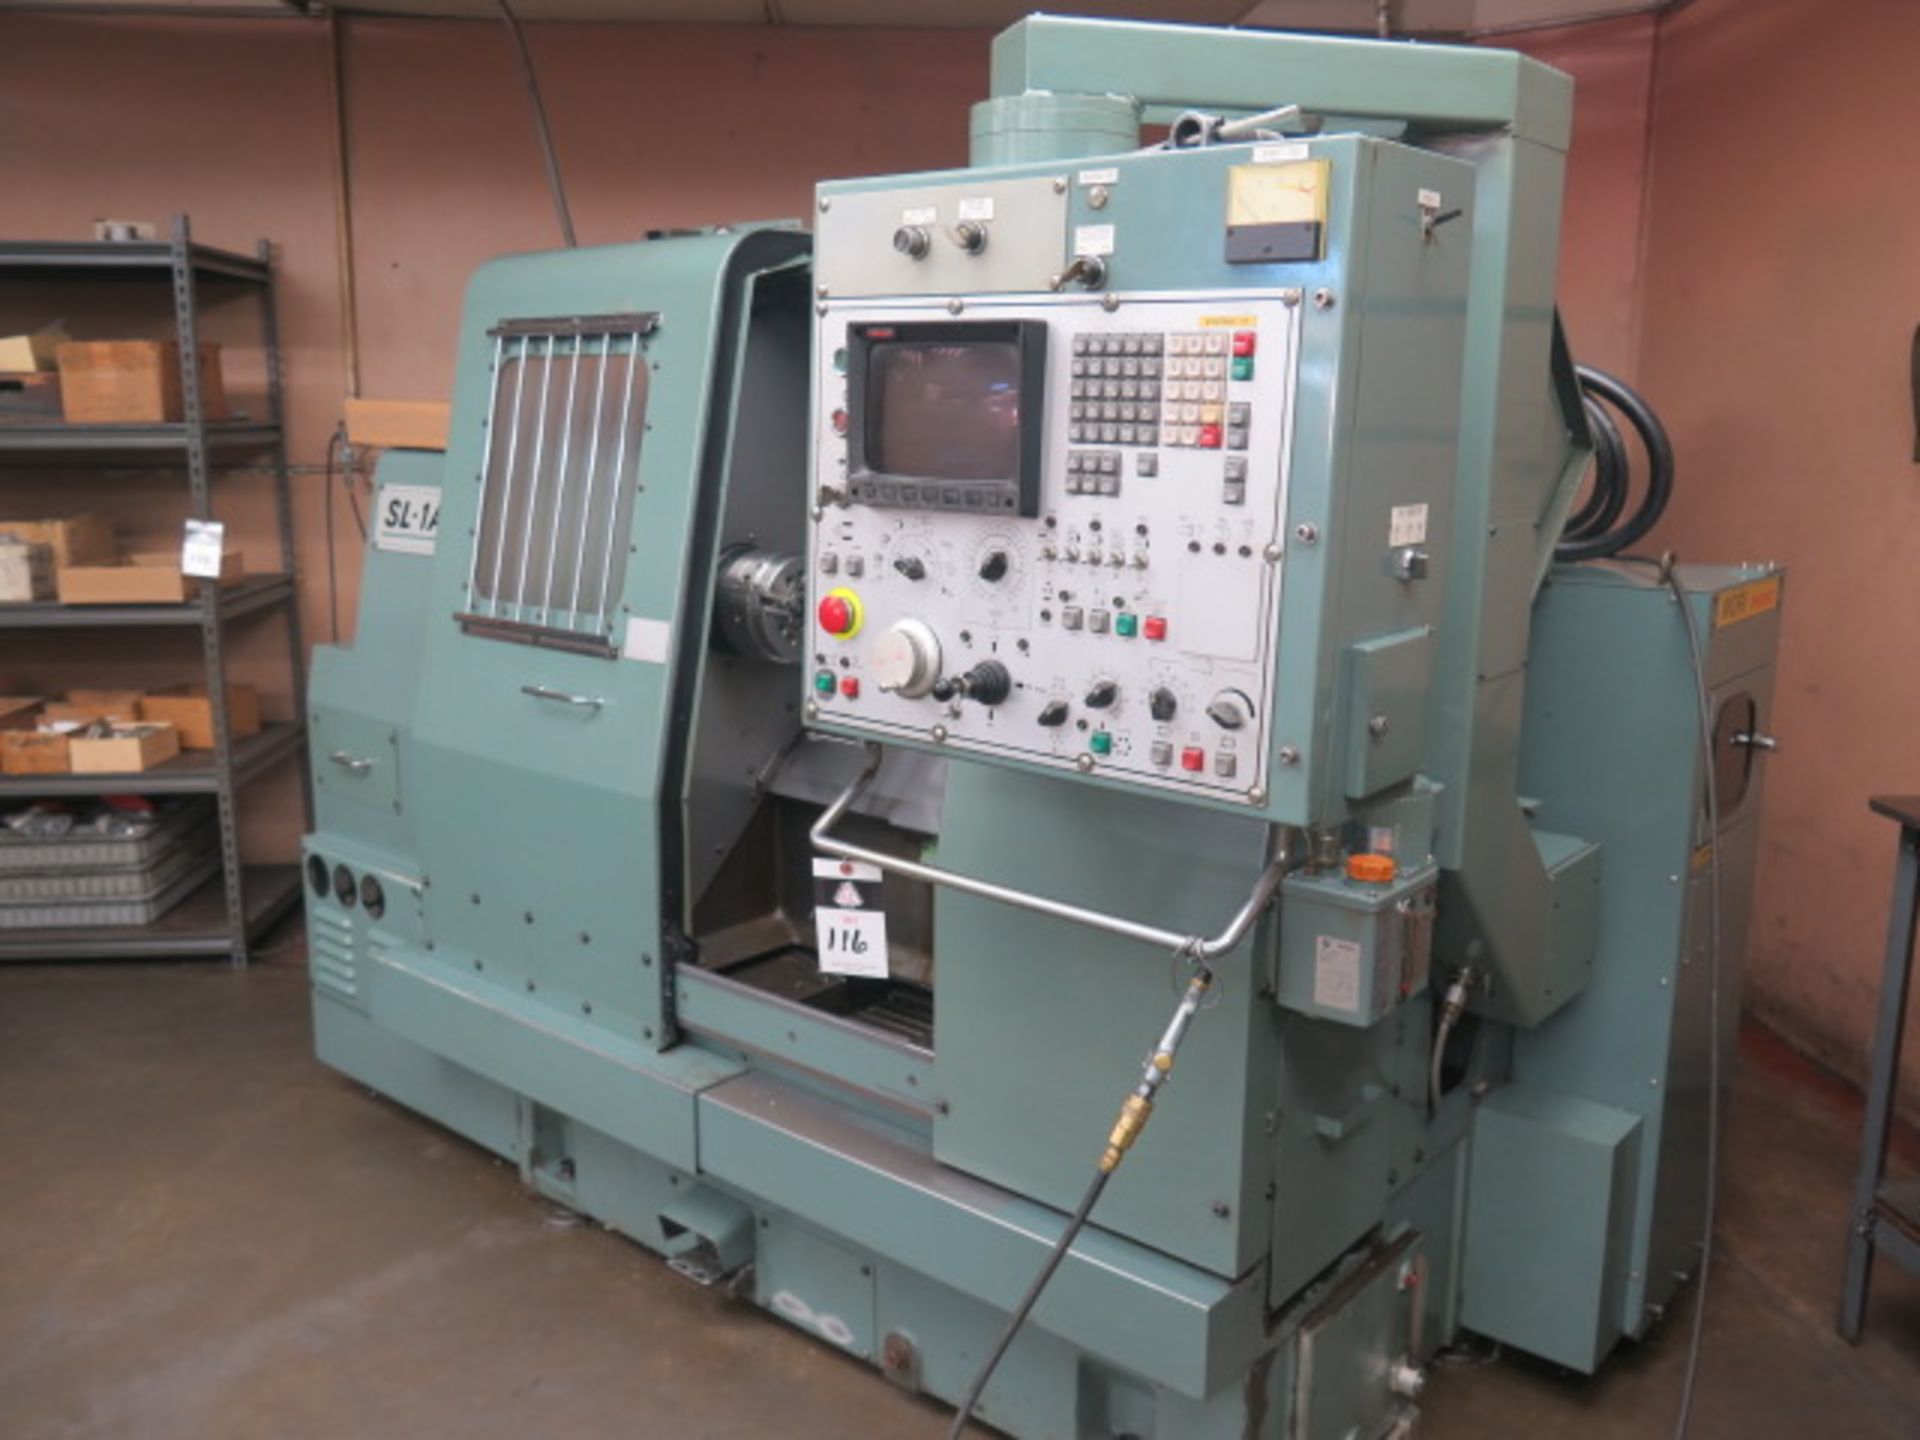 Mori Seiki SL-1A CNC Turning Center s/n 832 w/ Fanuc 11M Controls, 12-Station Turret, SOLD AS IS - Image 2 of 15